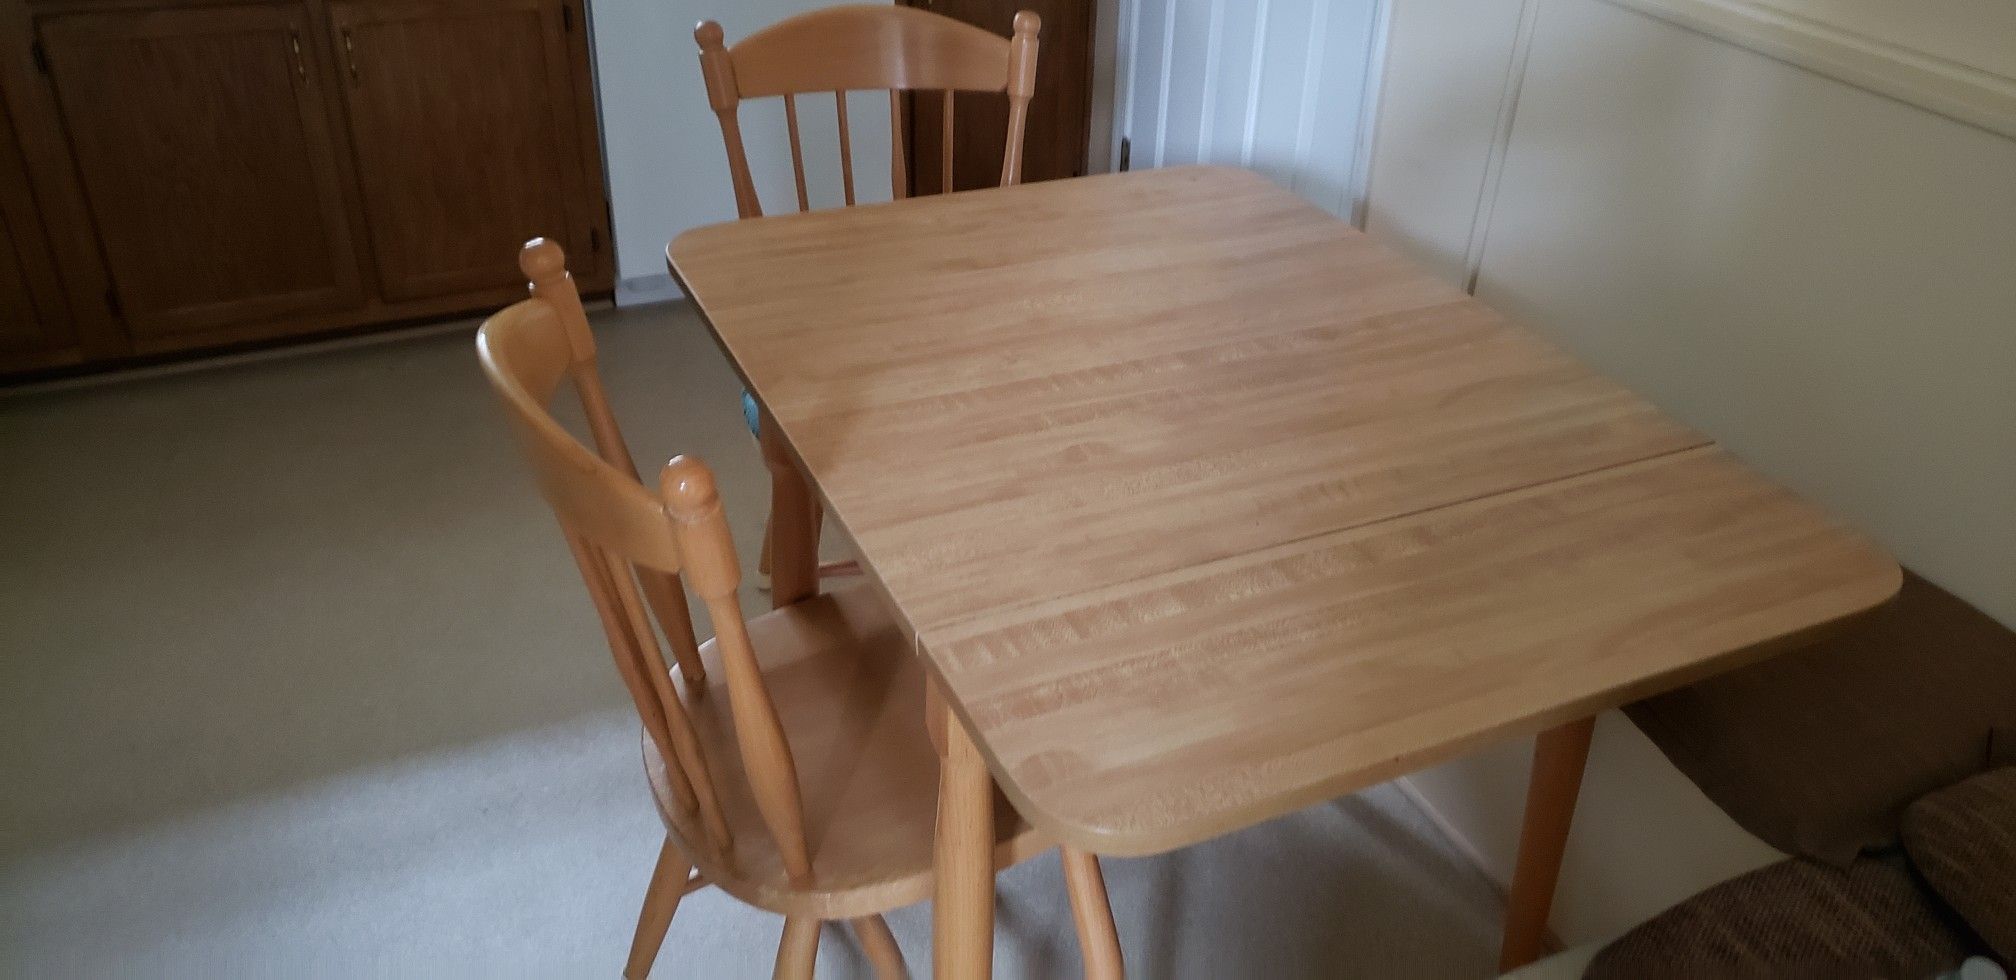 Kitchen kitchenette Table with 3 chairs